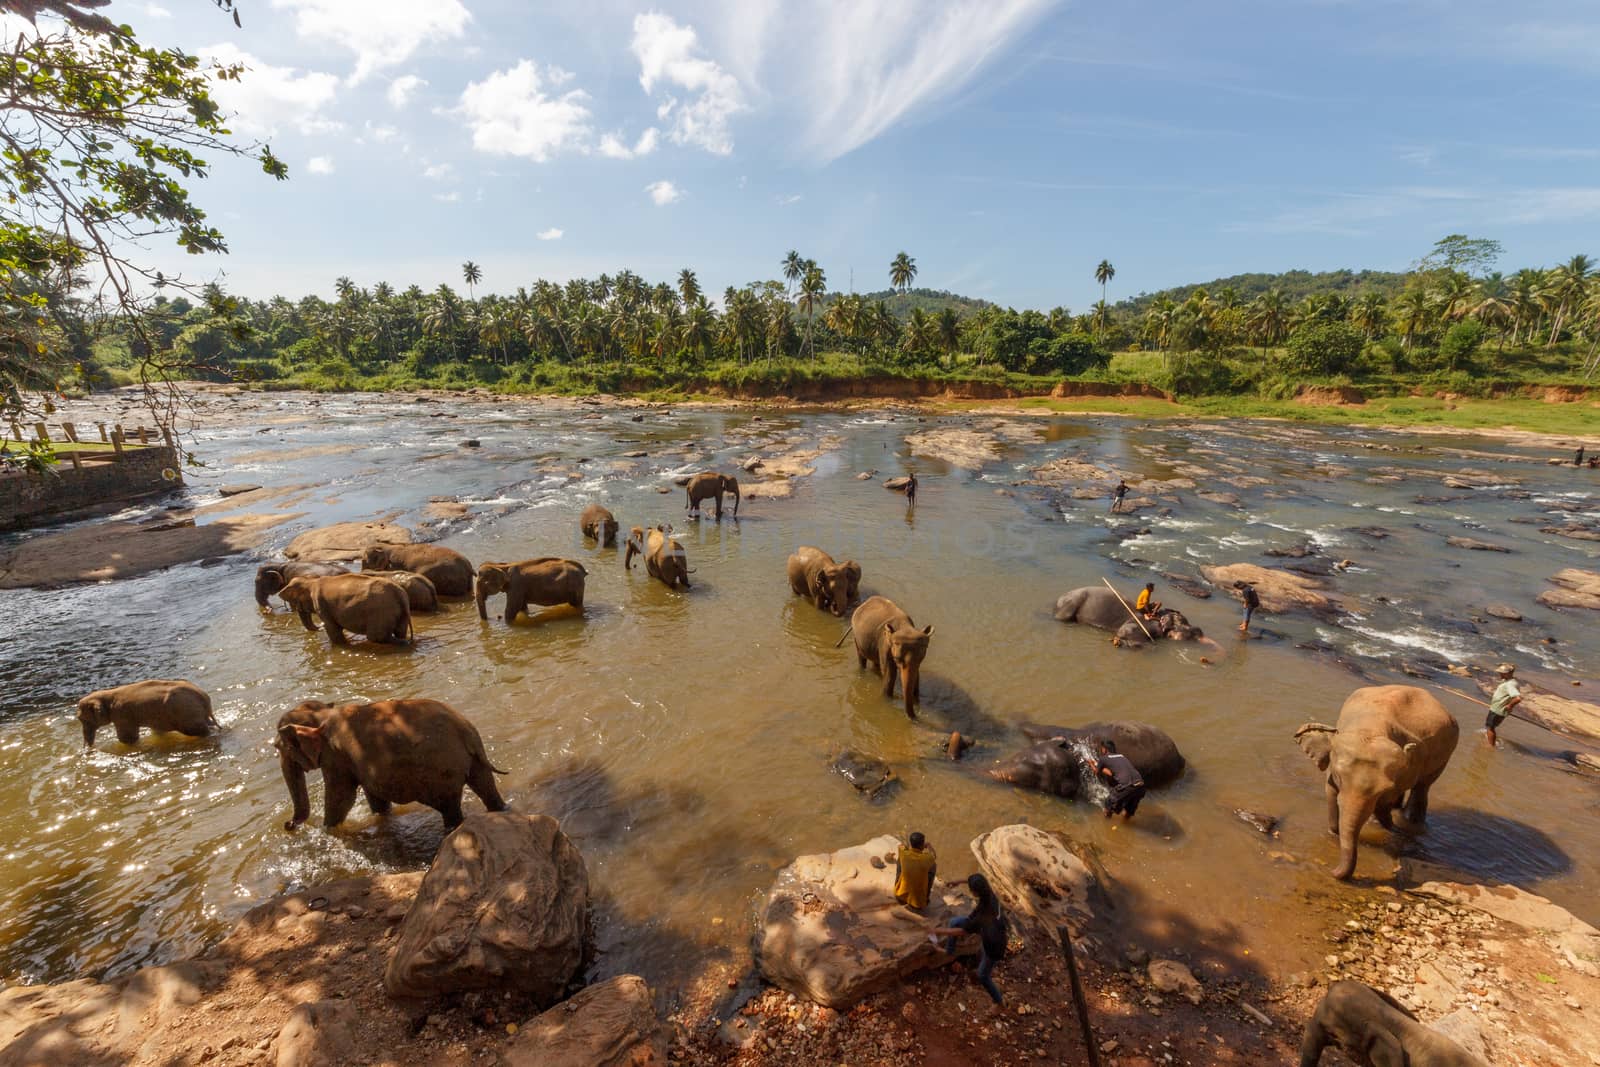 Large group of elephants having a splash in a rive to cool down from extreme heat wave. Concept of wild animals living free by dugulan